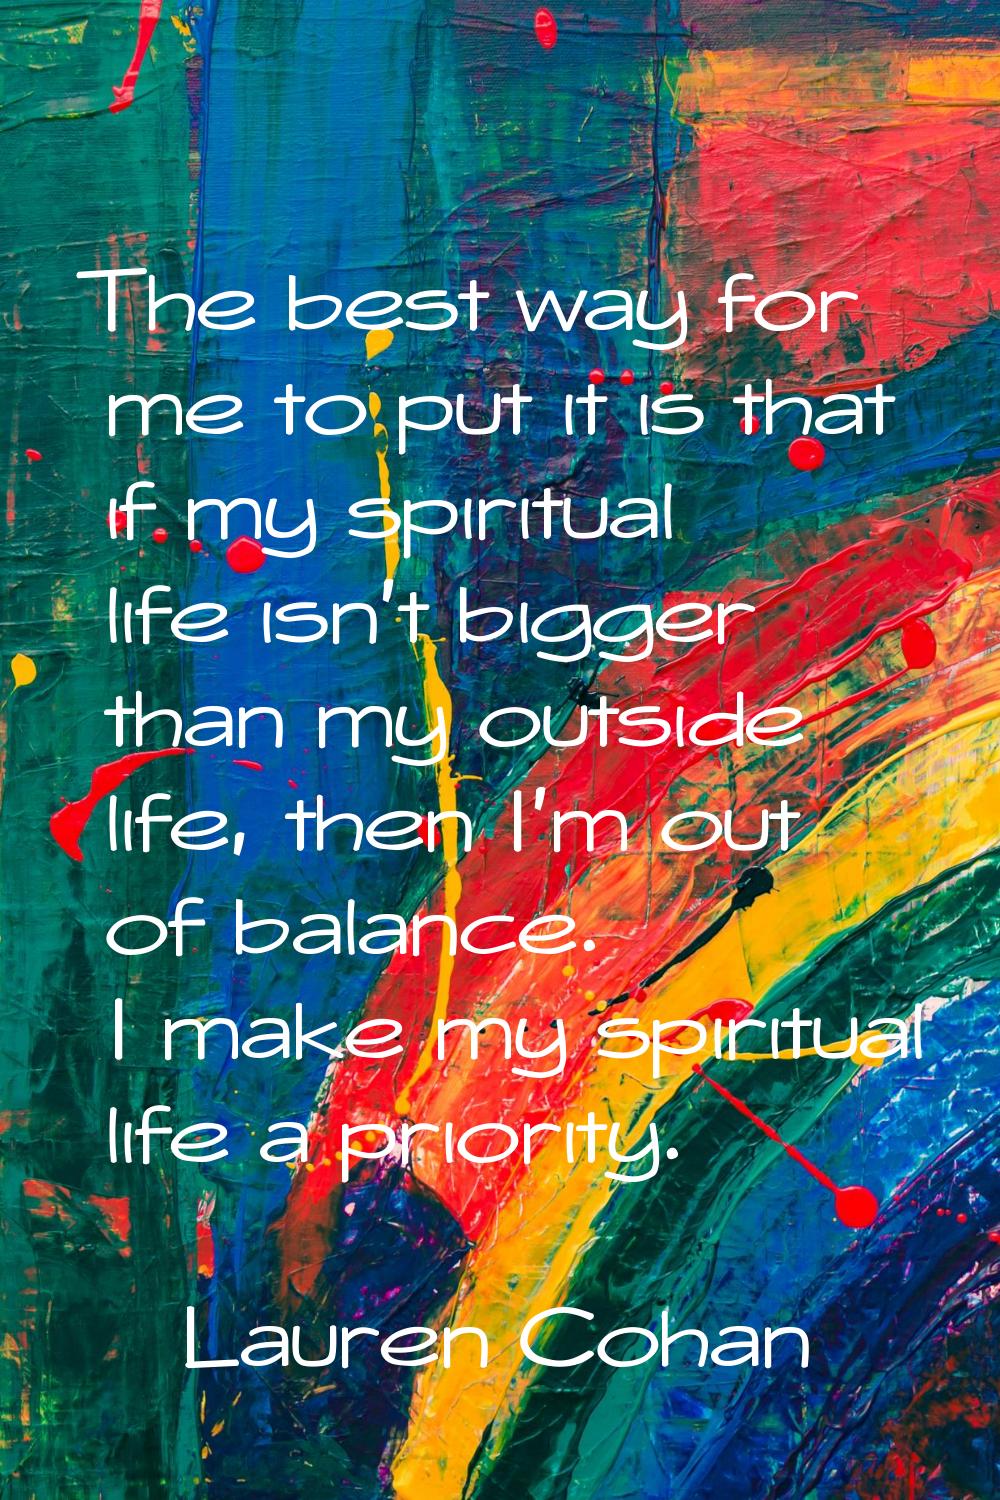 The best way for me to put it is that if my spiritual life isn't bigger than my outside life, then 